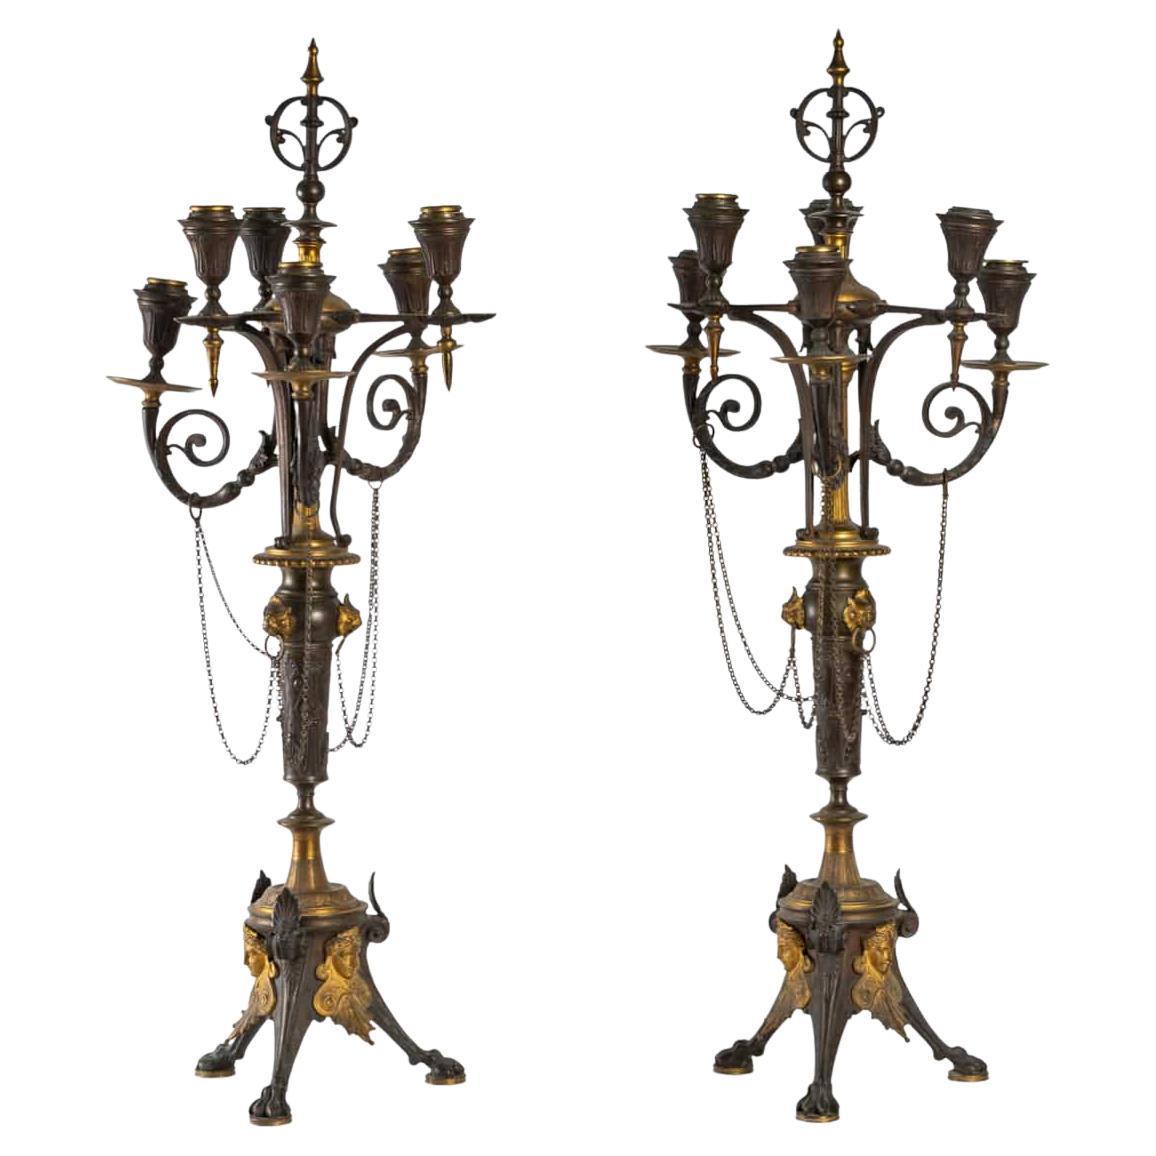 Pair of gilded and patinated candlesticks.
Late 19th - early 20th century.
Measures: Height : 74 cm
Width: 29 cm.